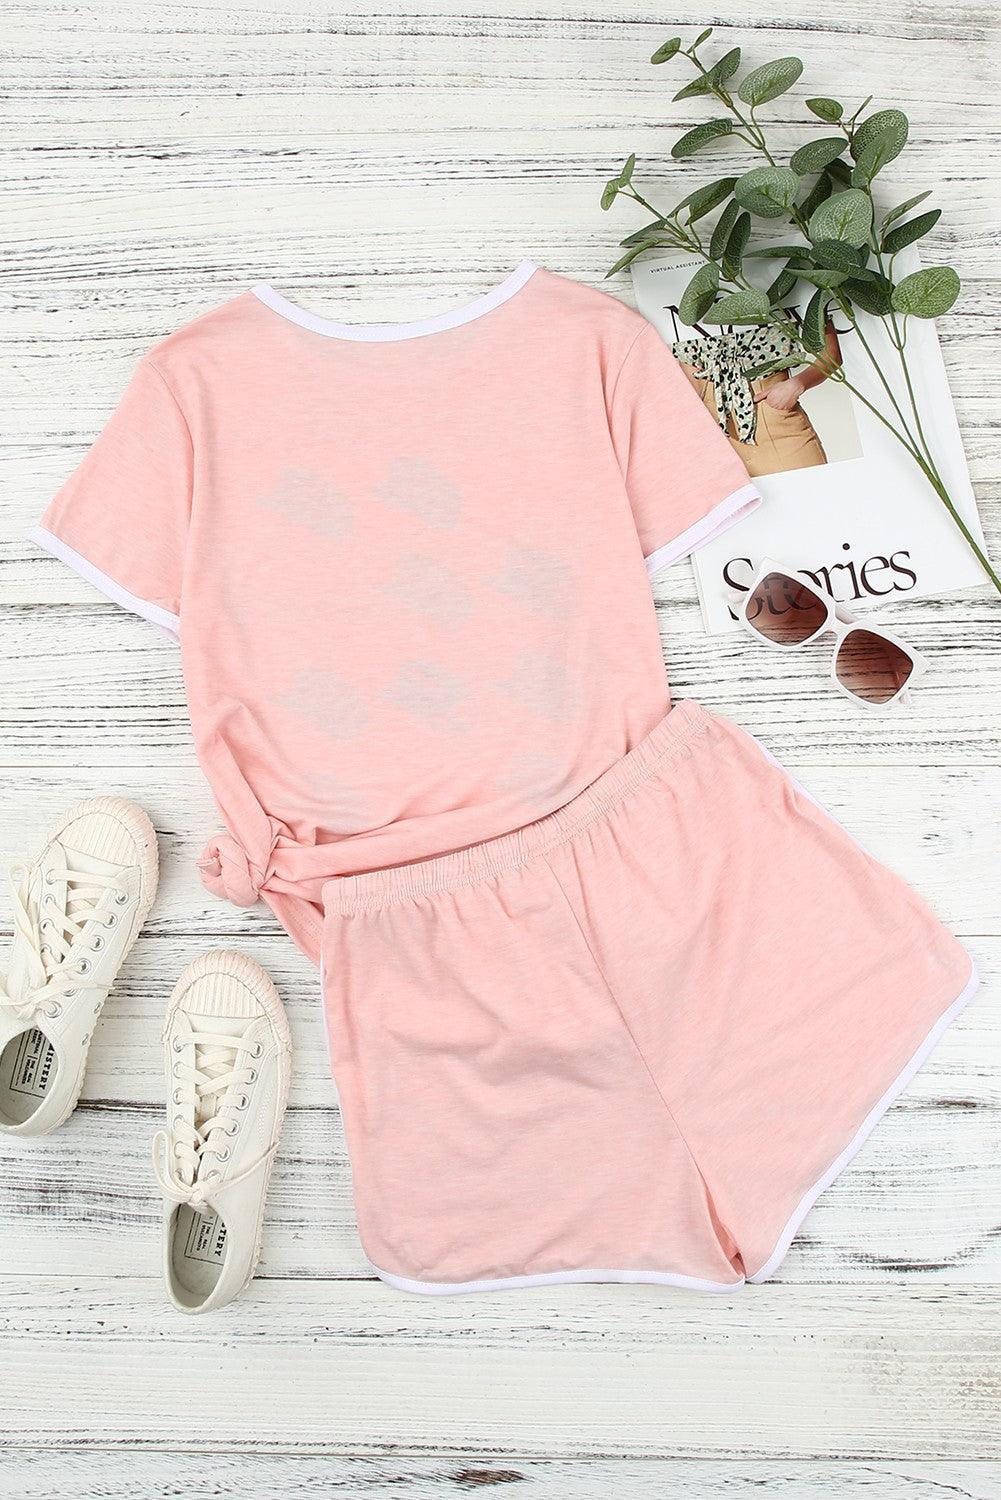 a pink shirt and shorts outfit with sunglasses